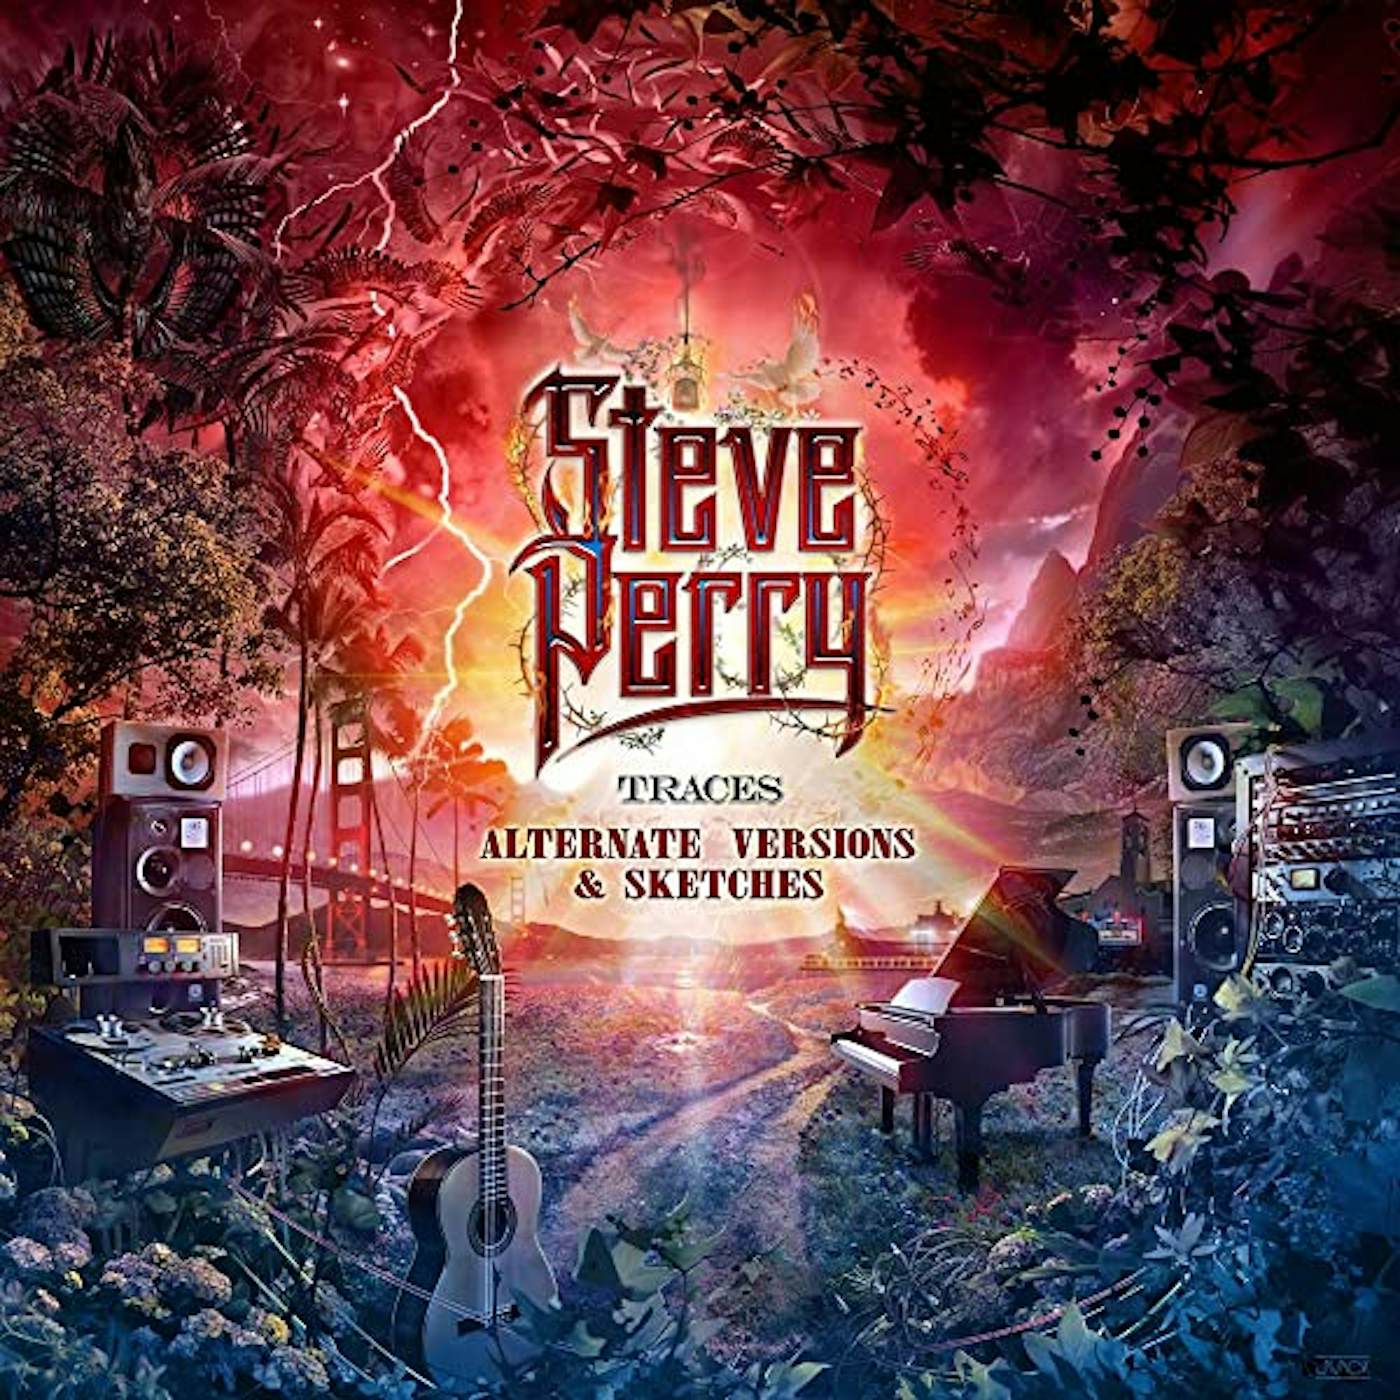 Steve Perry TRACES: ALTERNATE VERSIONS & SKETCHES Vinyl Record